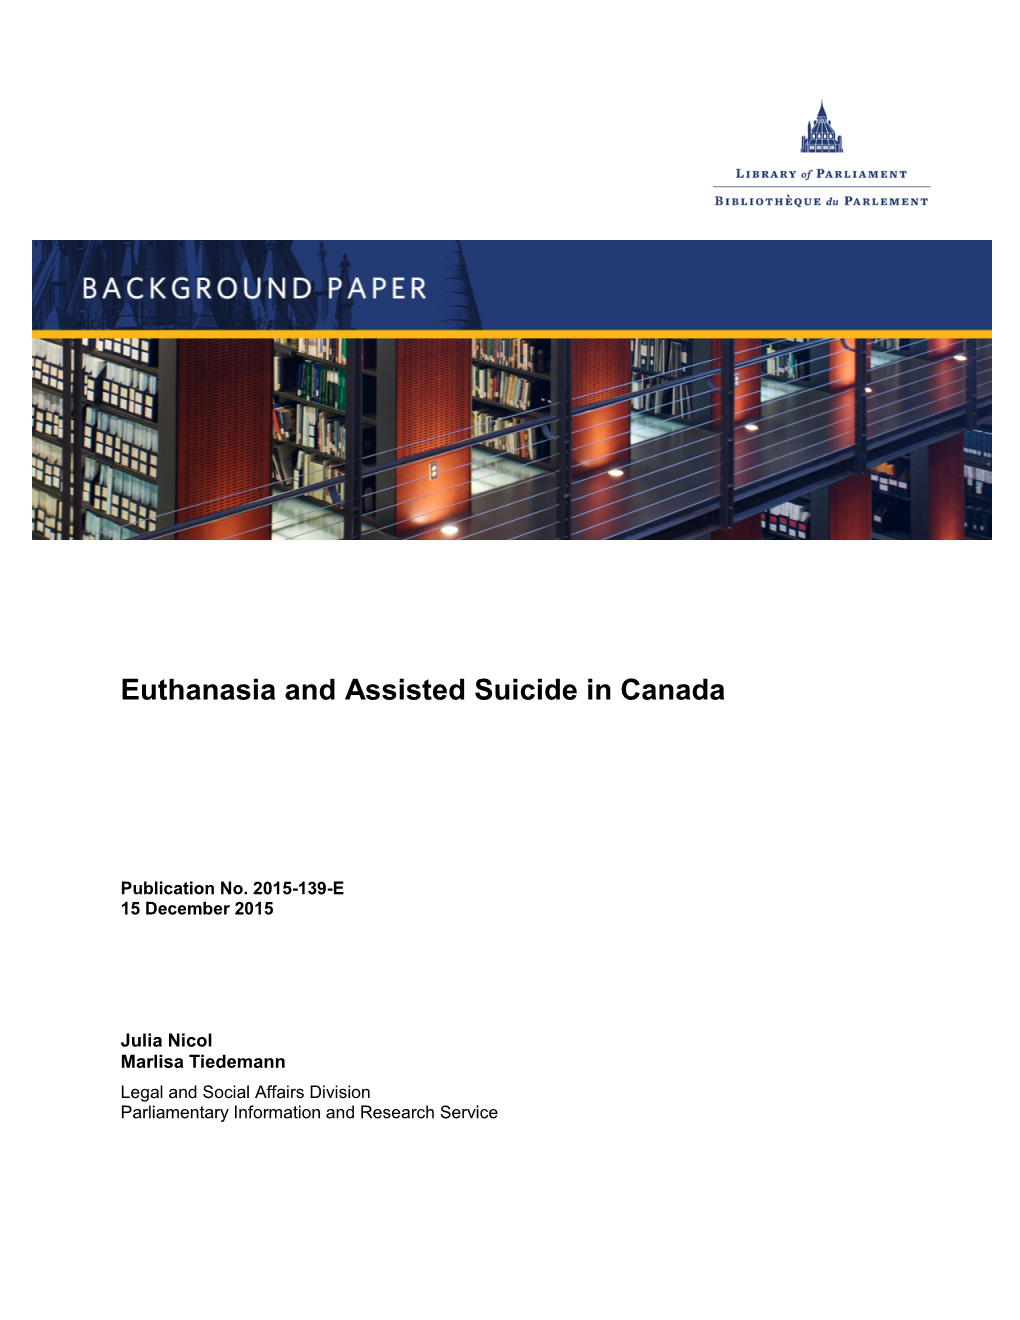 Euthanasia and Assisted Suicide in Canada